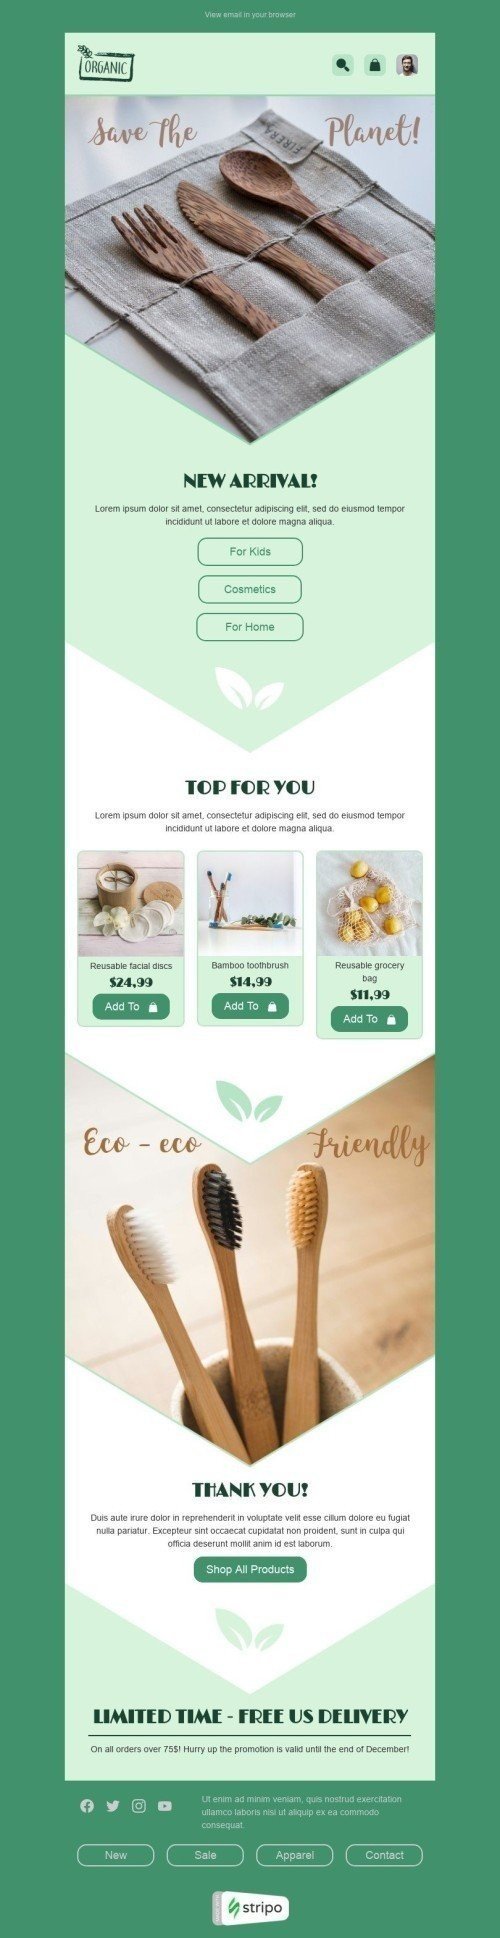 Earth Day Email Template "Eco eco friendly" for Organic & Eco Goods industry mobile view